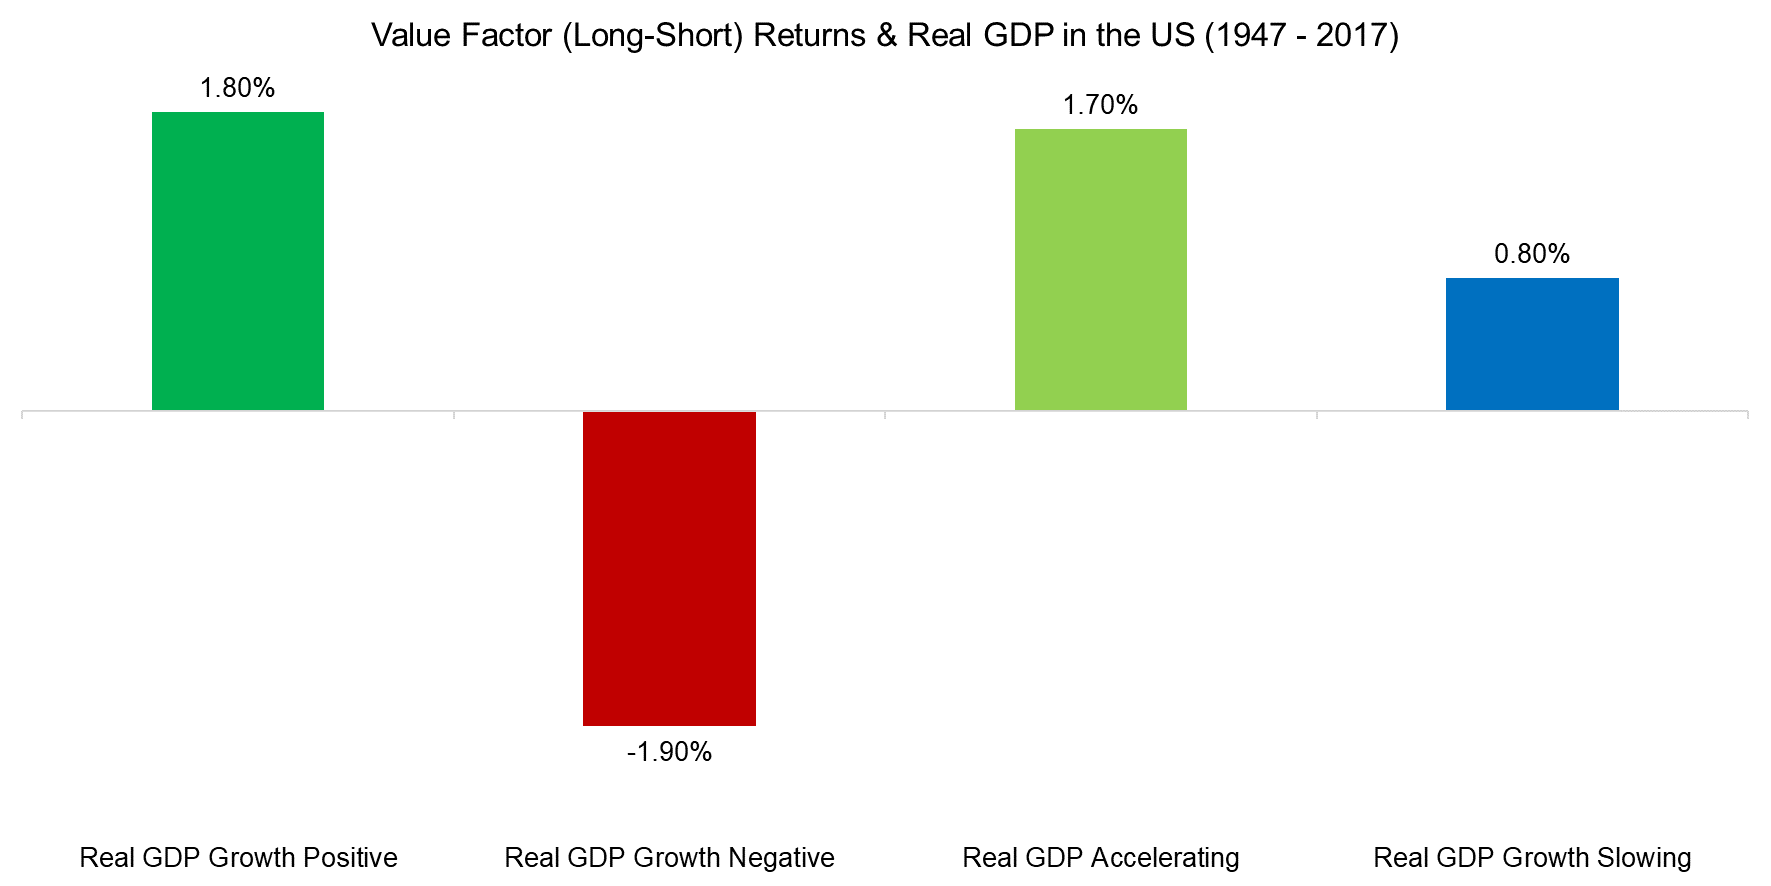 Value Factor (Long-Short) Returns & Real GDP in the US (1947 - 2017)